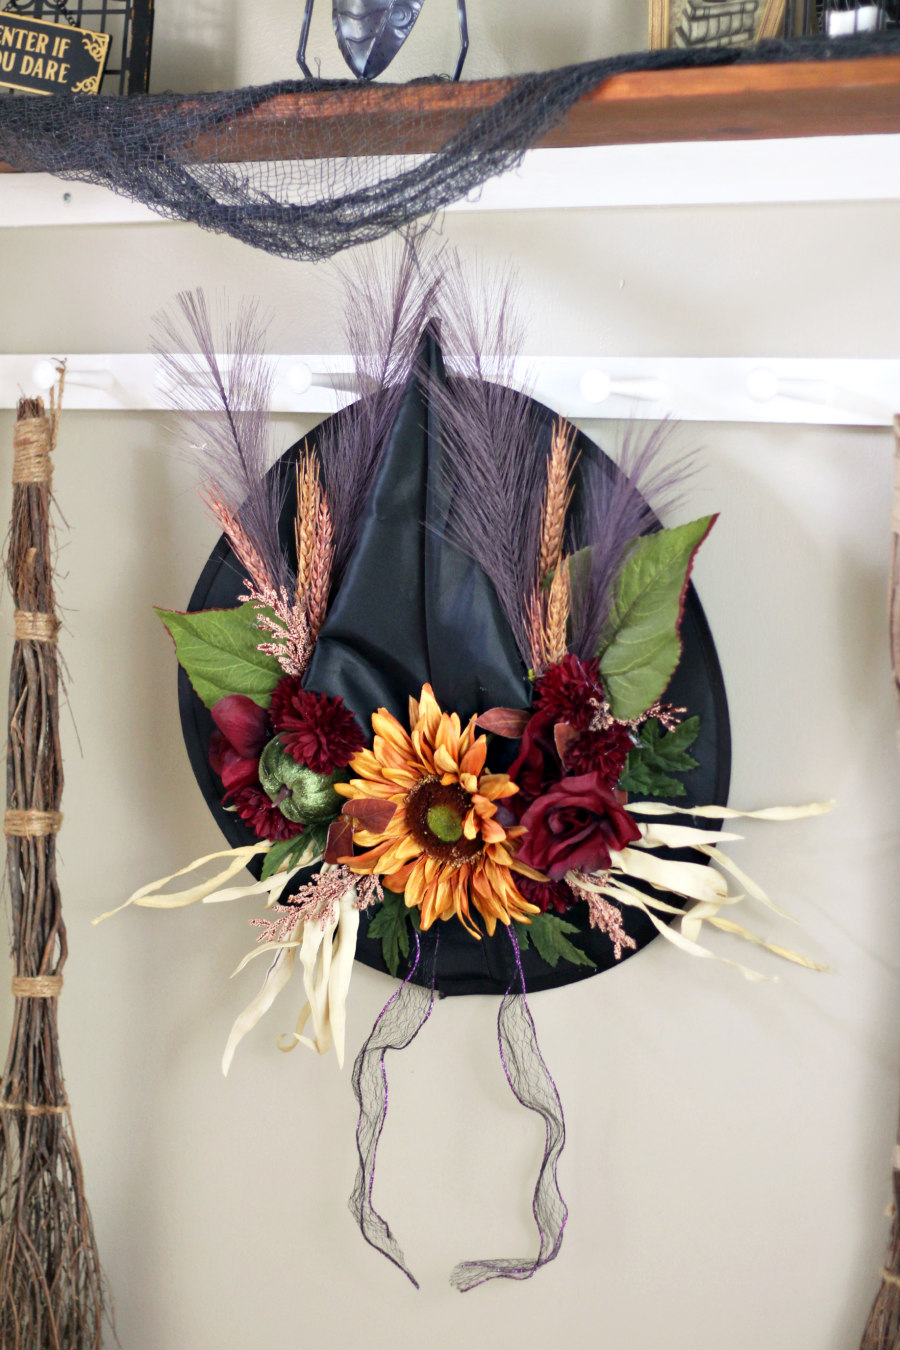 Fall Floral Witch Hat hung on hooks next to cinnamon broom and shelf of Halloween decorations.